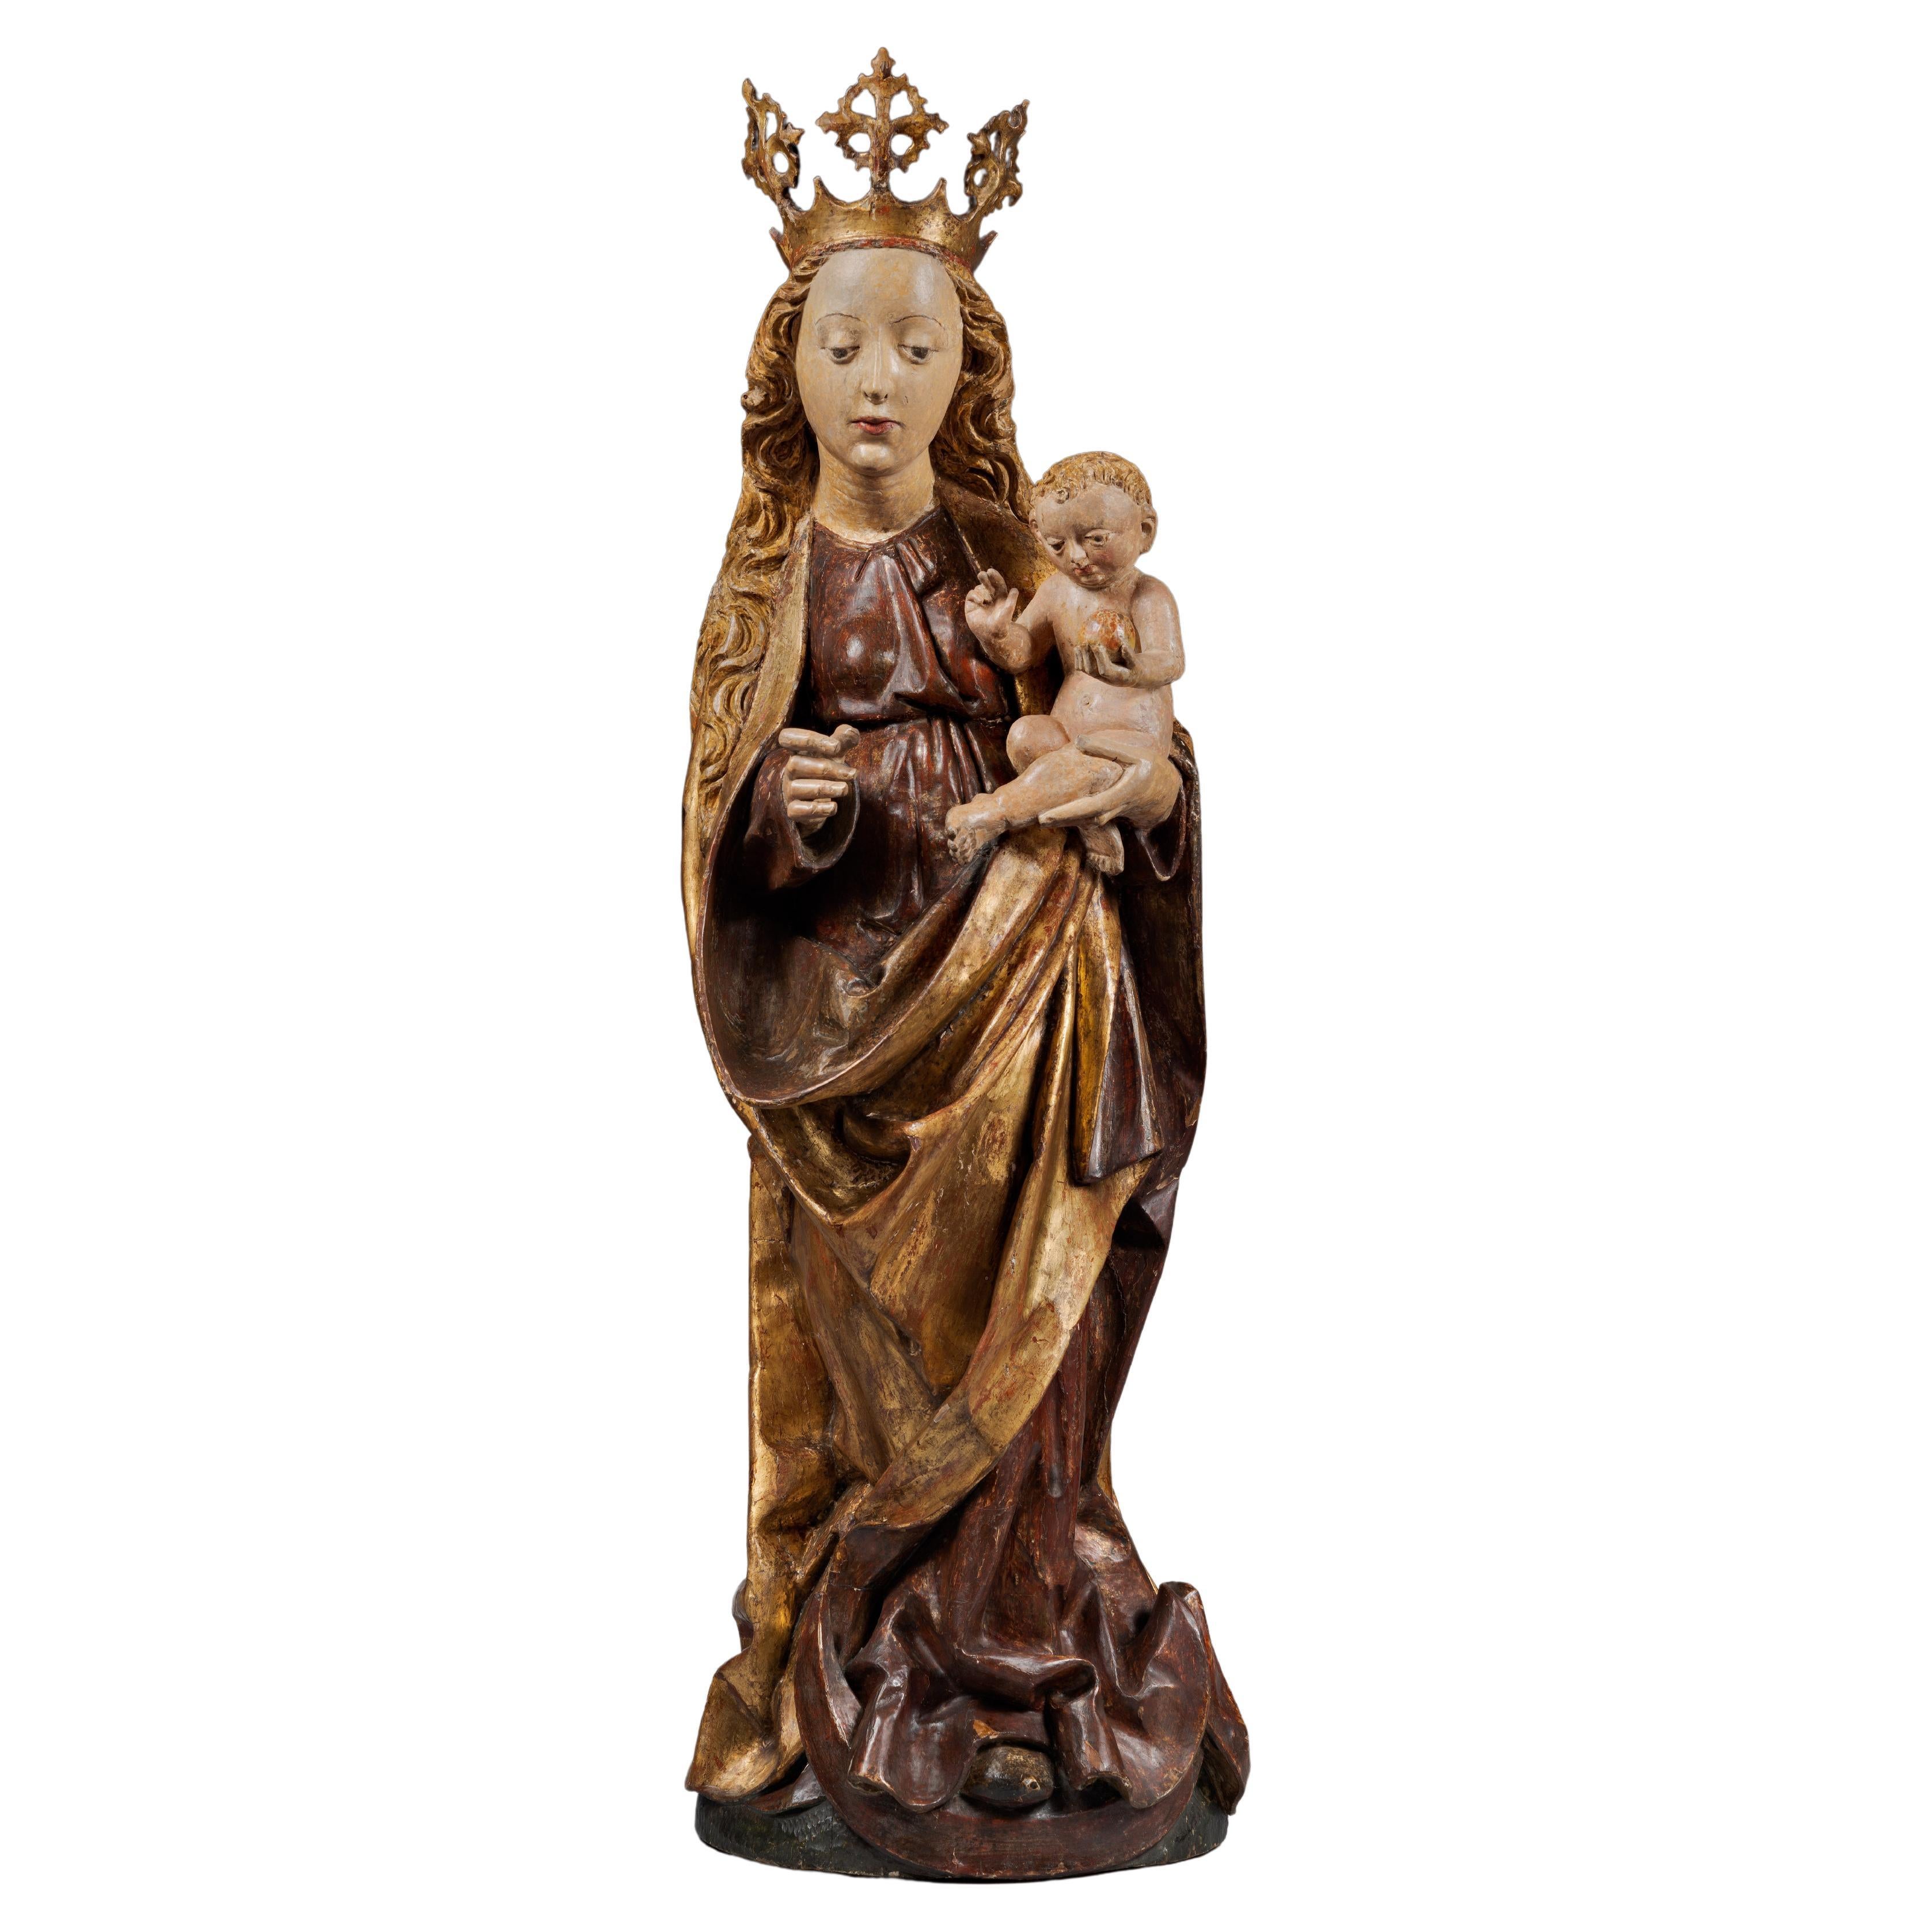 Polychrome carved wood Virgin and Child from the 15th Century